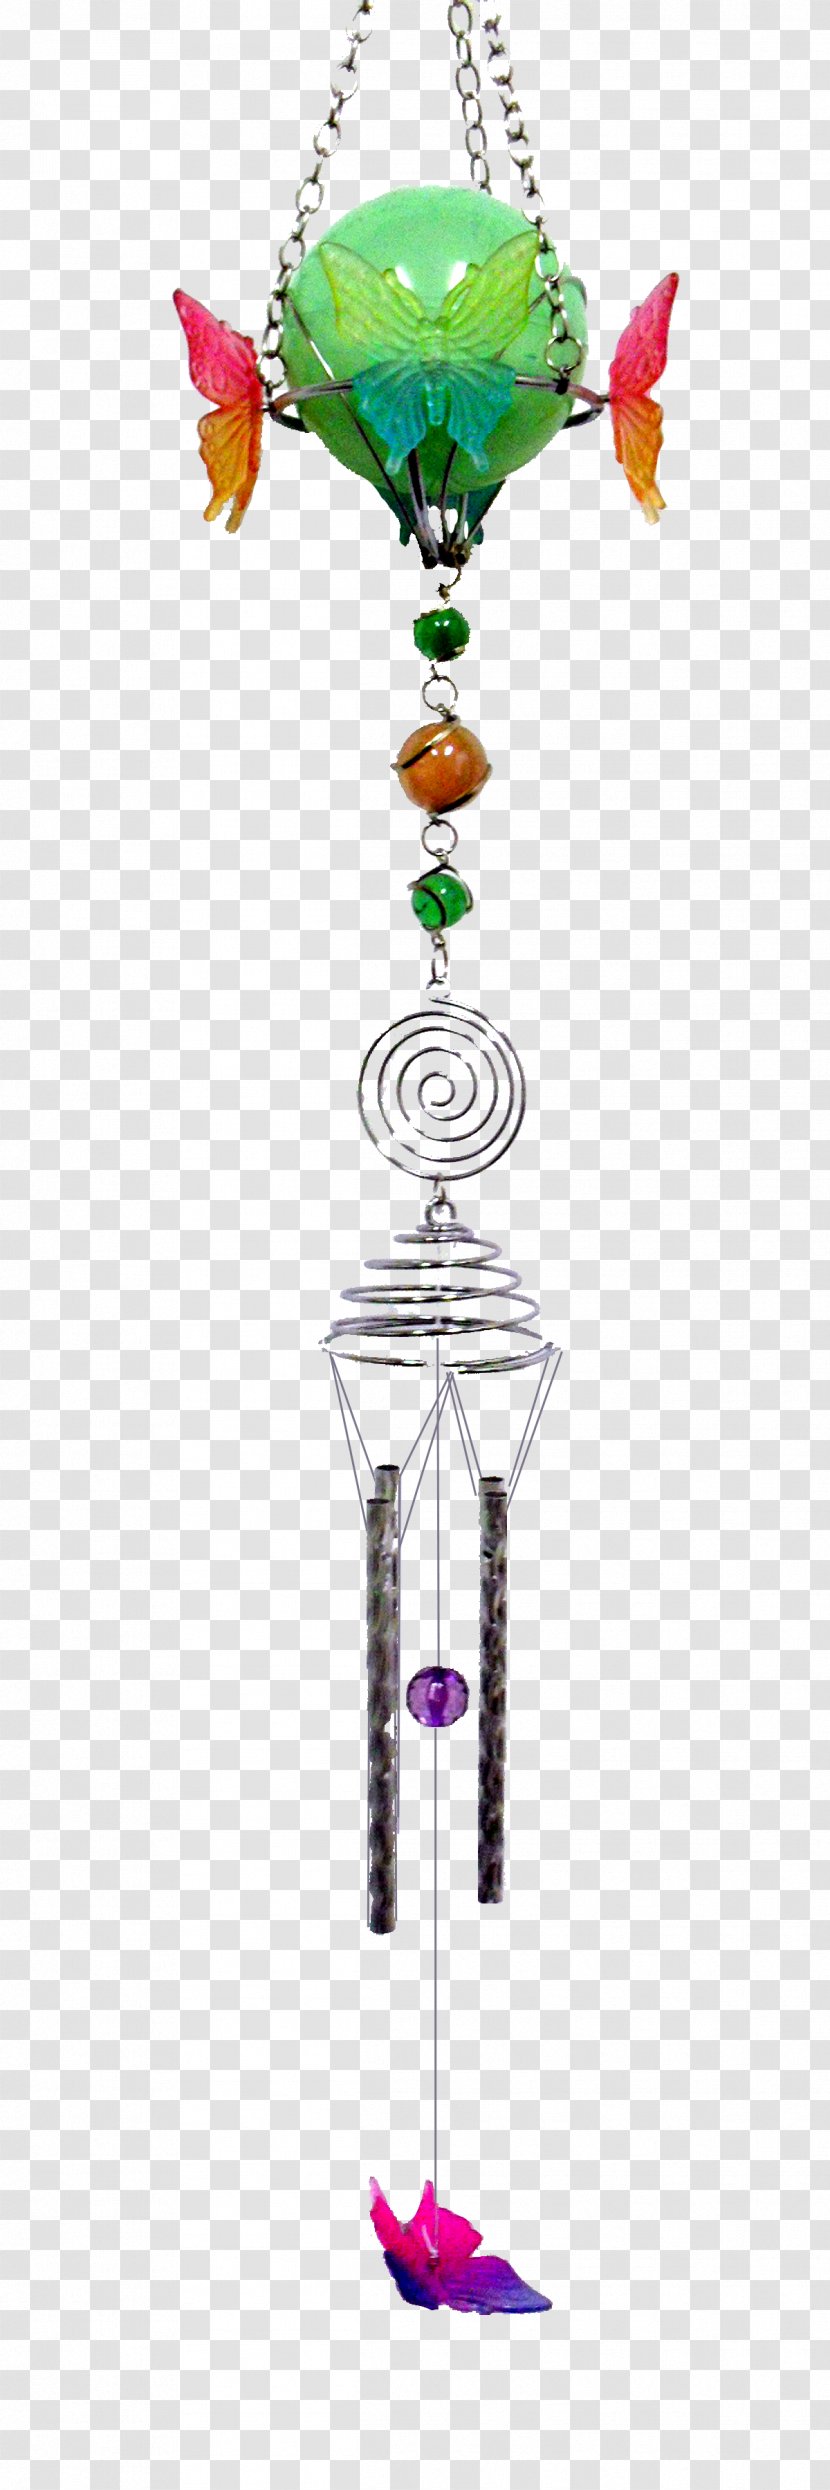 Light-emitting Diode Solar Lamp Power - Wind Chime Transparent PNG